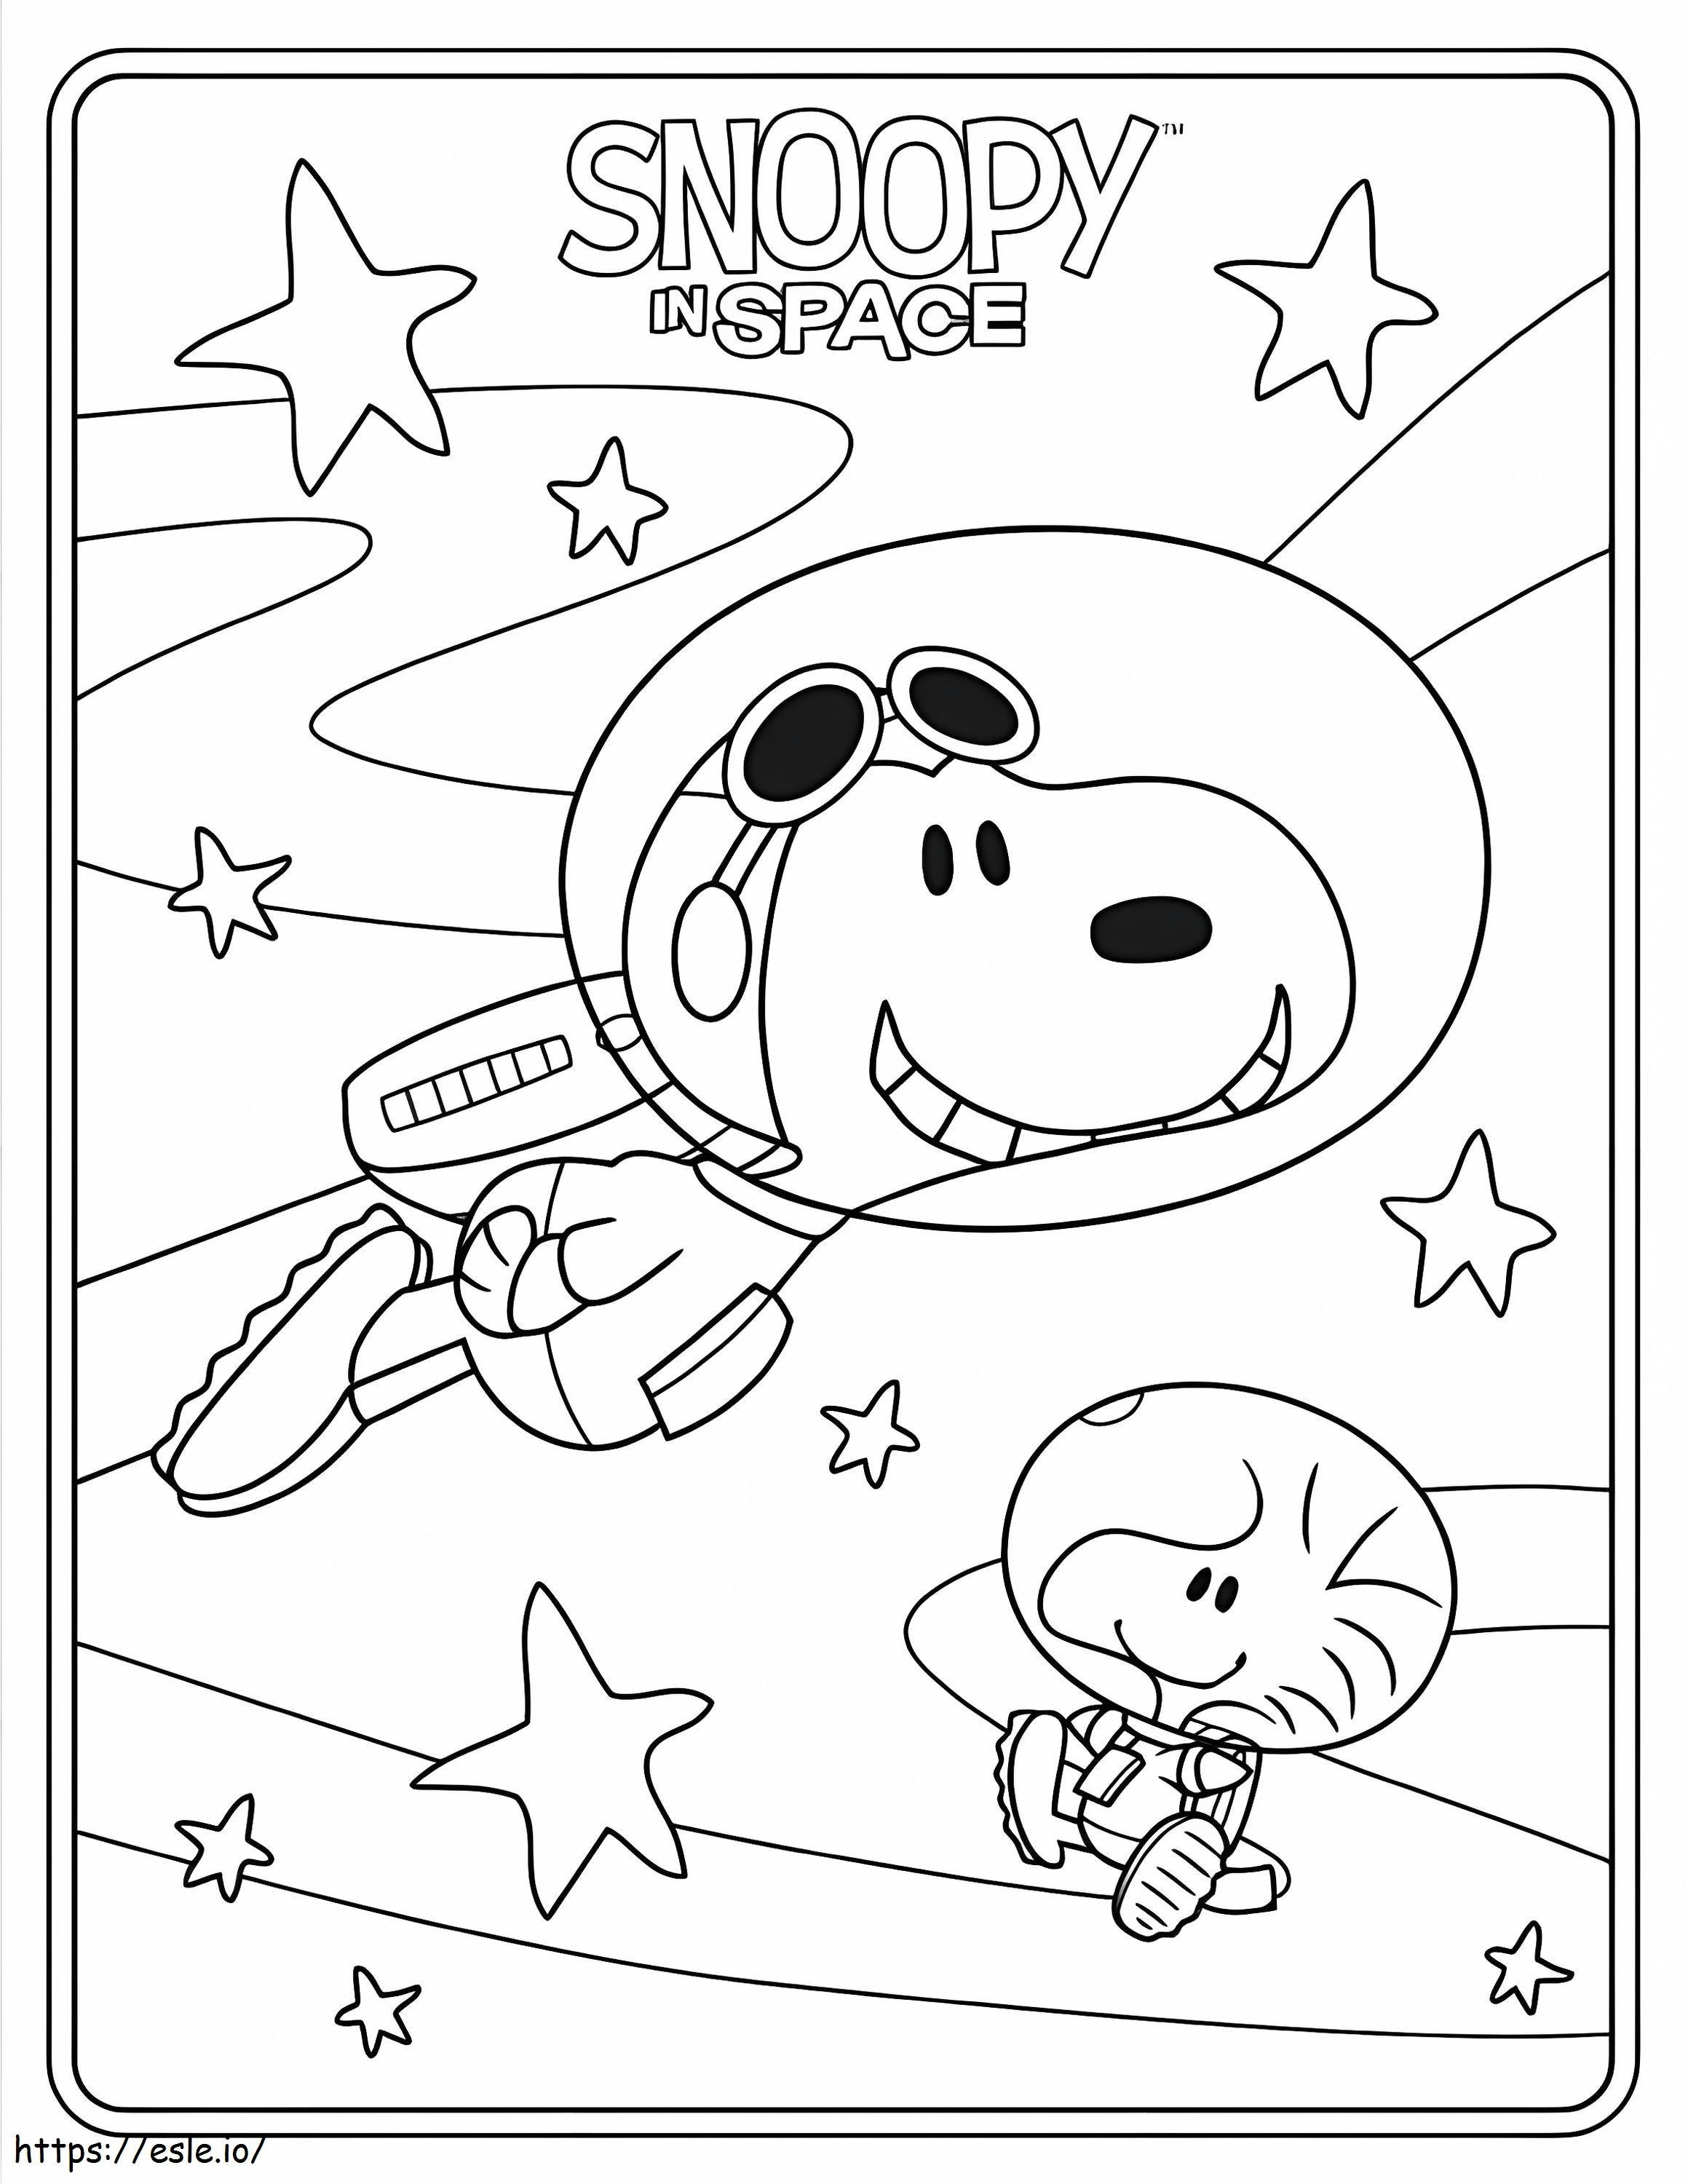 Snoopy In Space coloring page